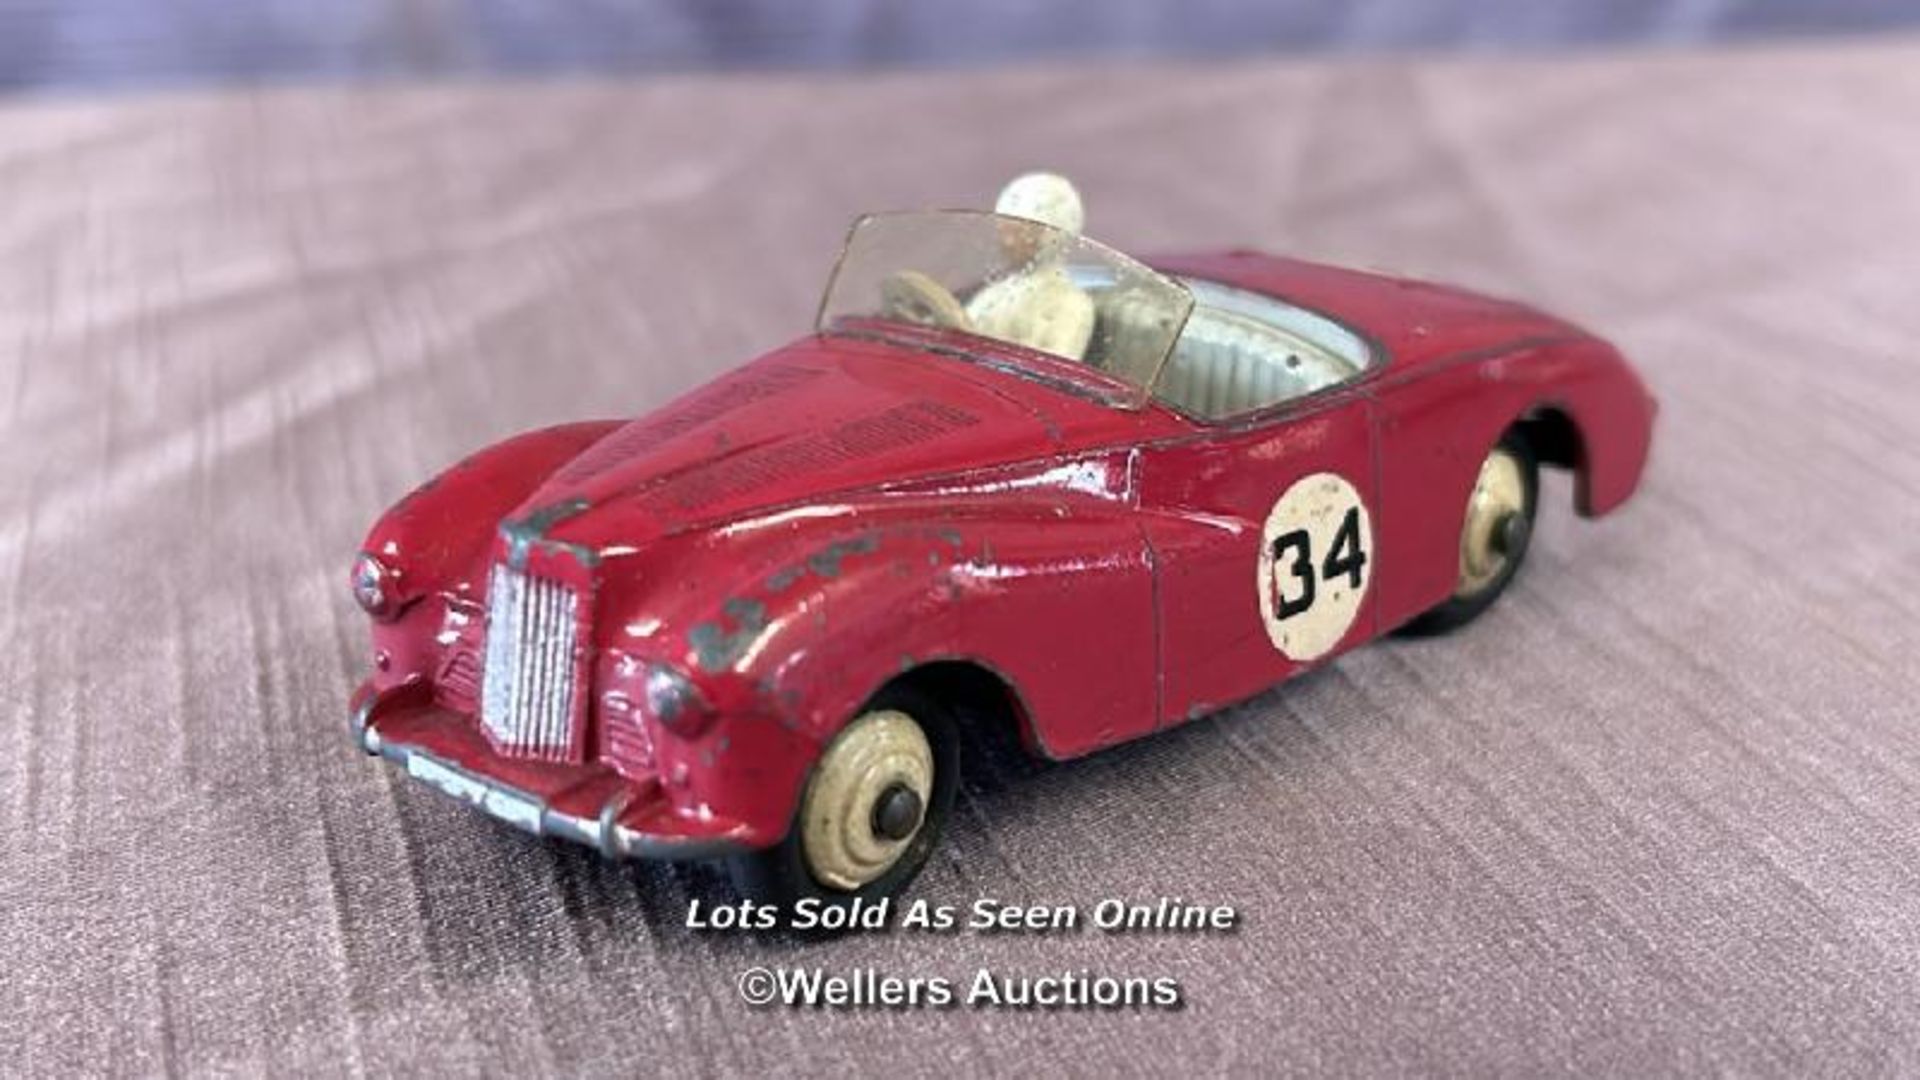 THREE DINKY DIE CAST RACING CARS INCLUDING SUNBEAM ALPINE NO. 107, AUSTIN HEALEY NO. 109 AND ASTON - Image 2 of 7